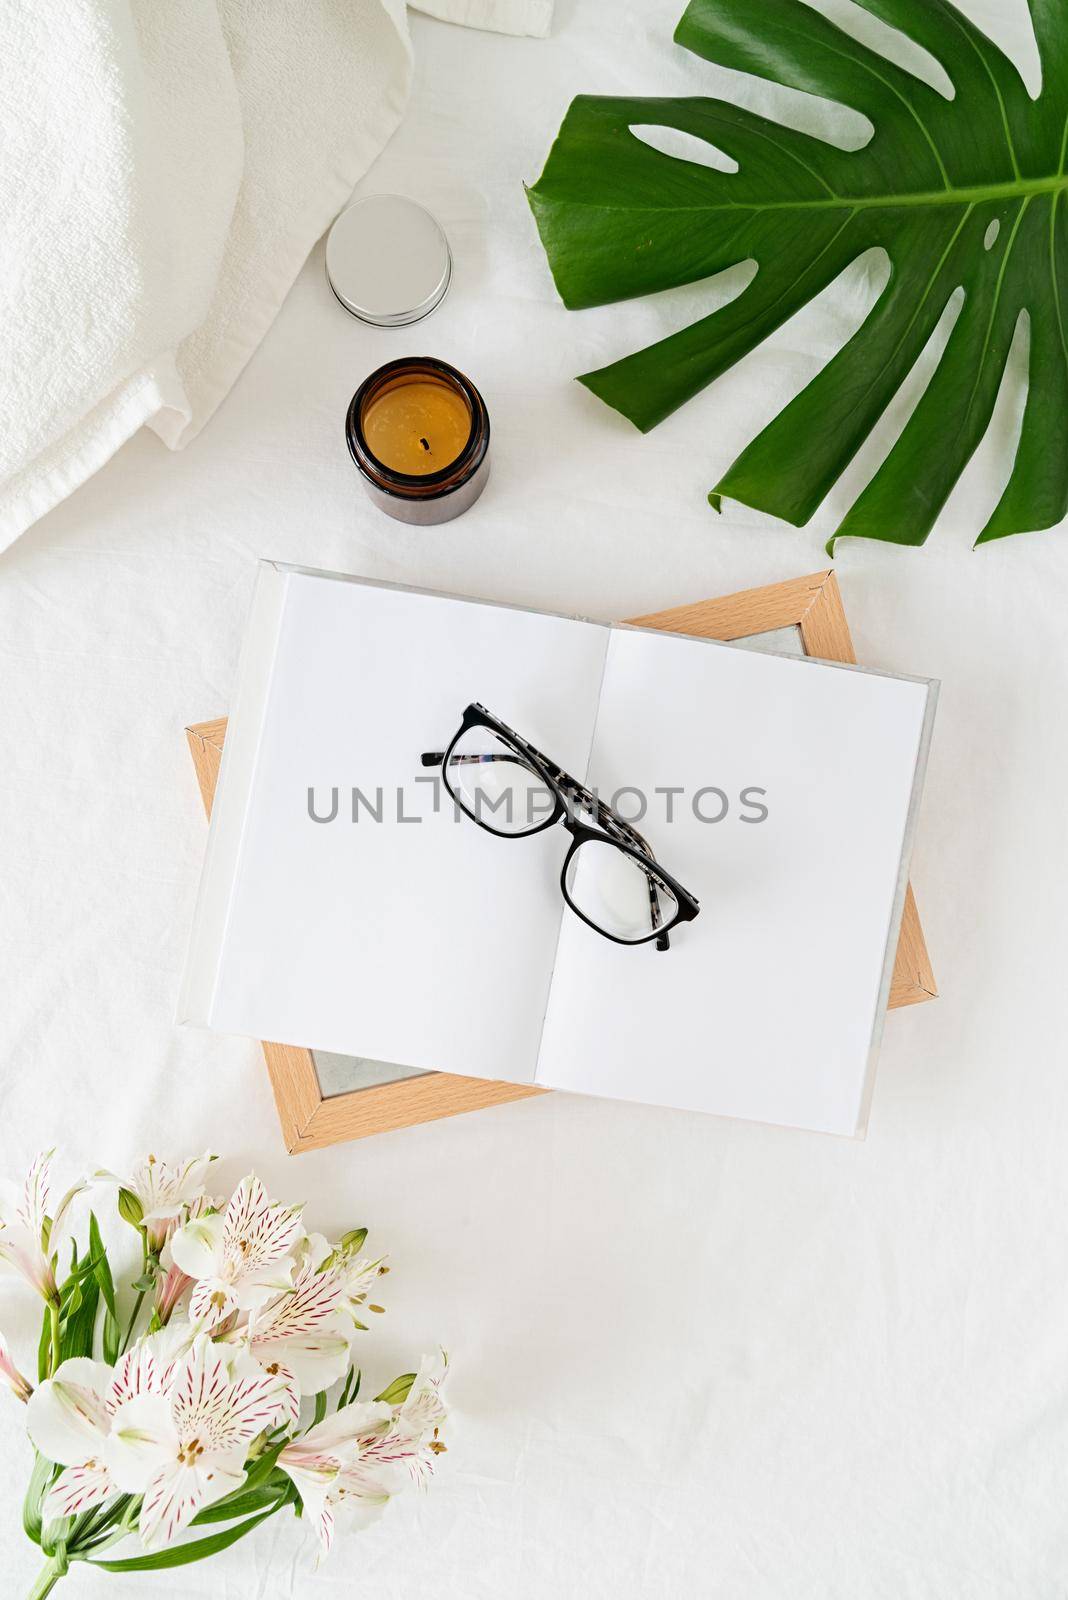 Blank opened book, candle, glasses, flowers on white bed, flat lay, mock up, flat lay